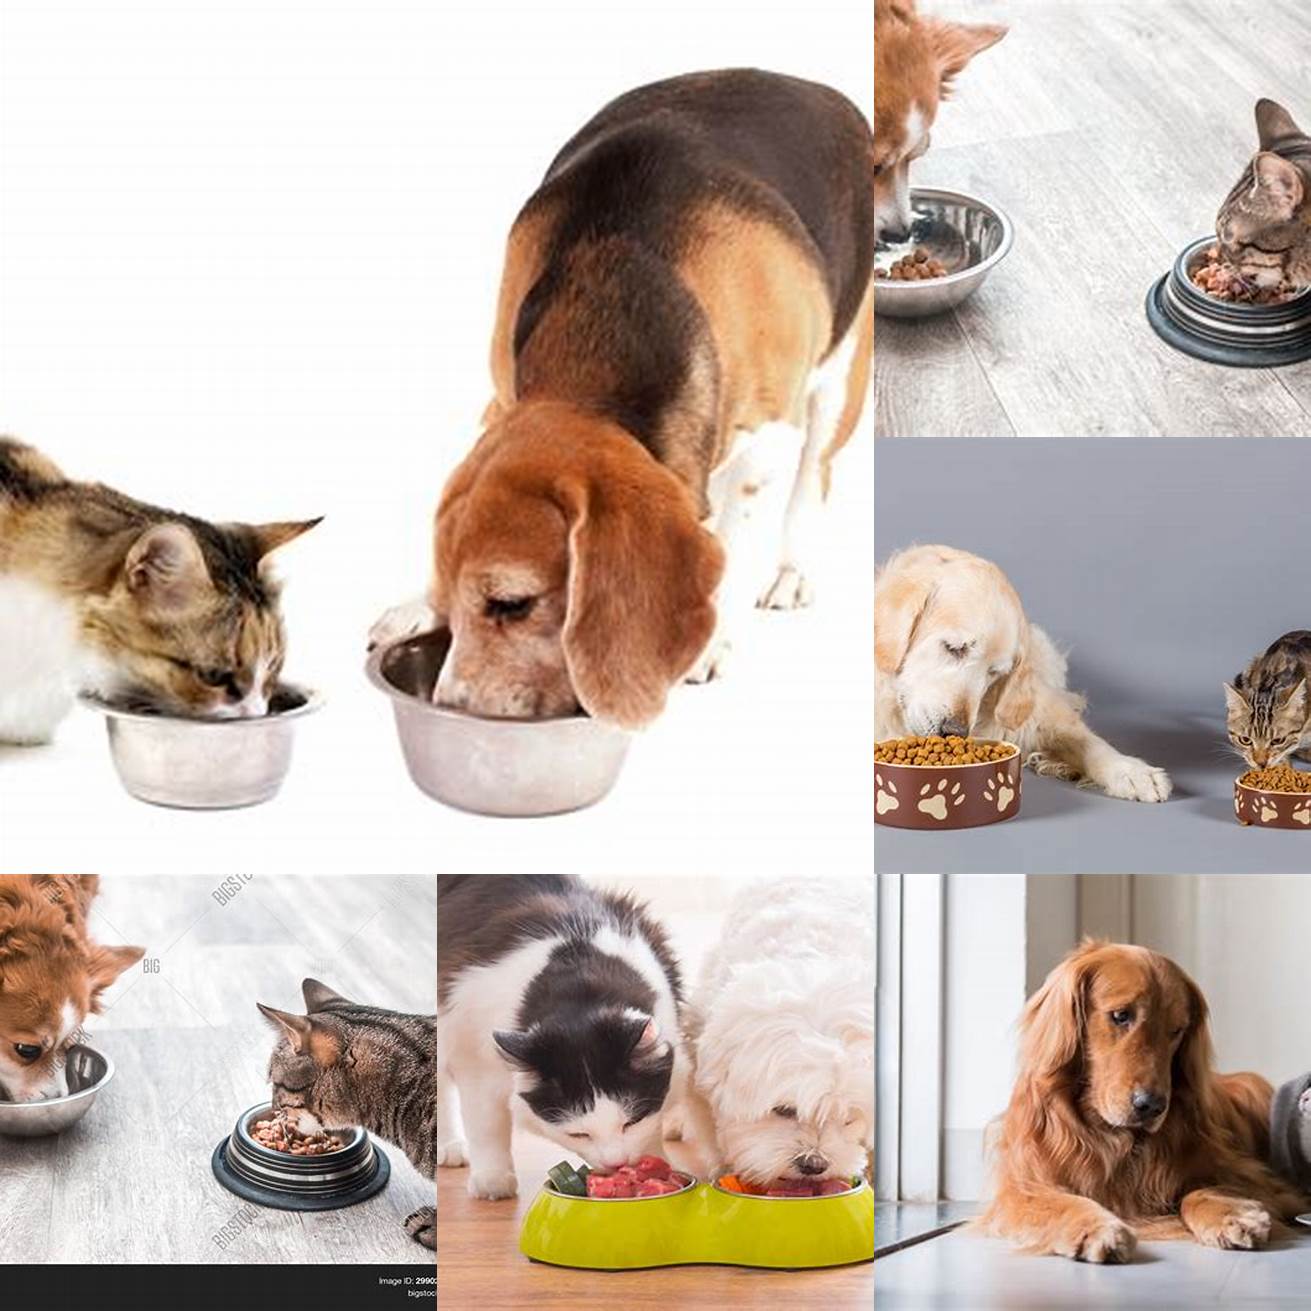 Image Idea 3 A Dog and a Cat Eating Together